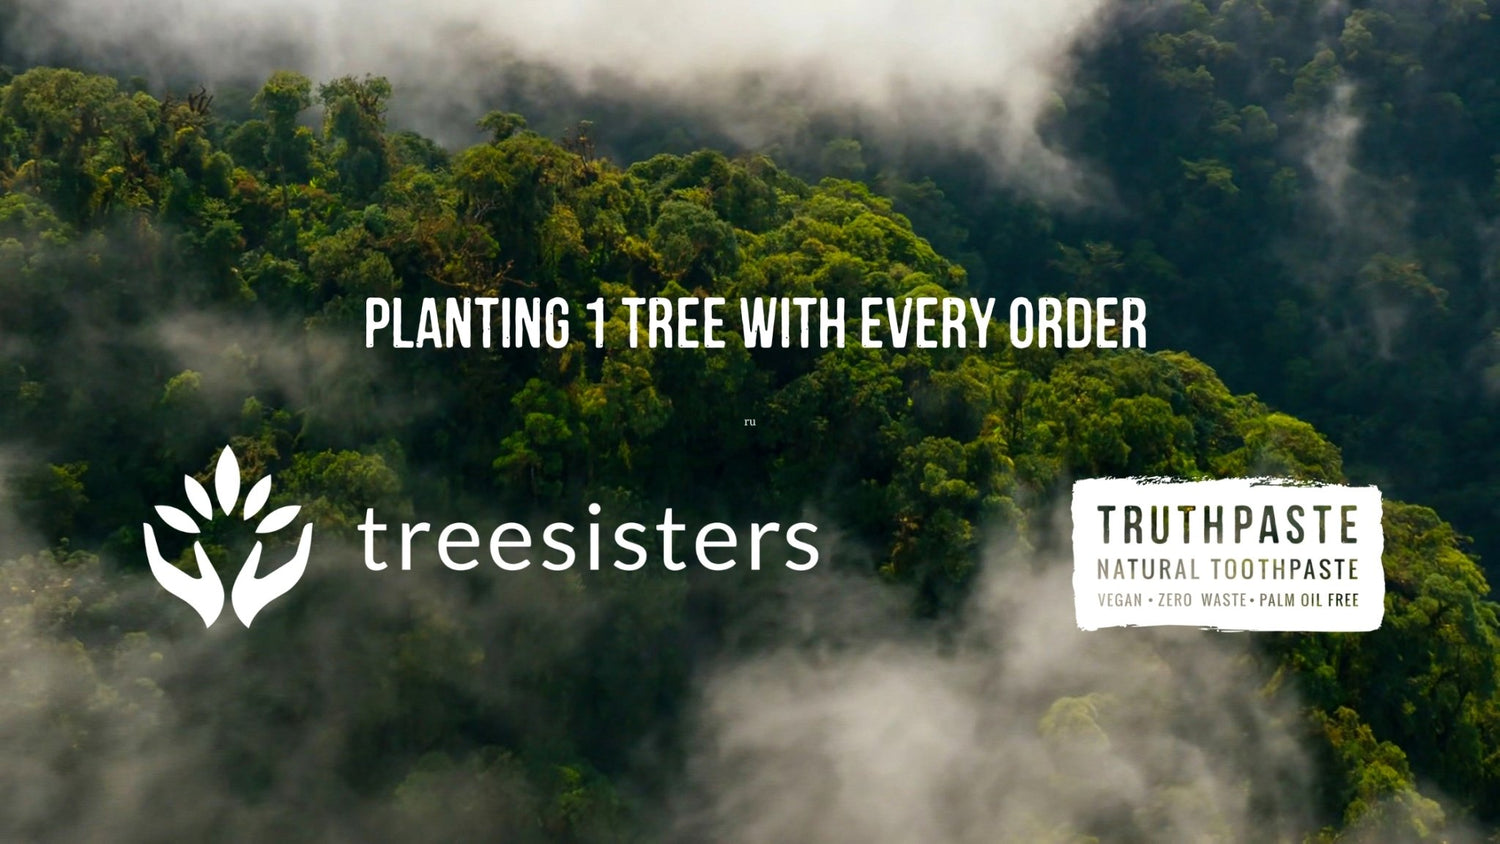 Restoring our planet with TreeSisters - truthpaste